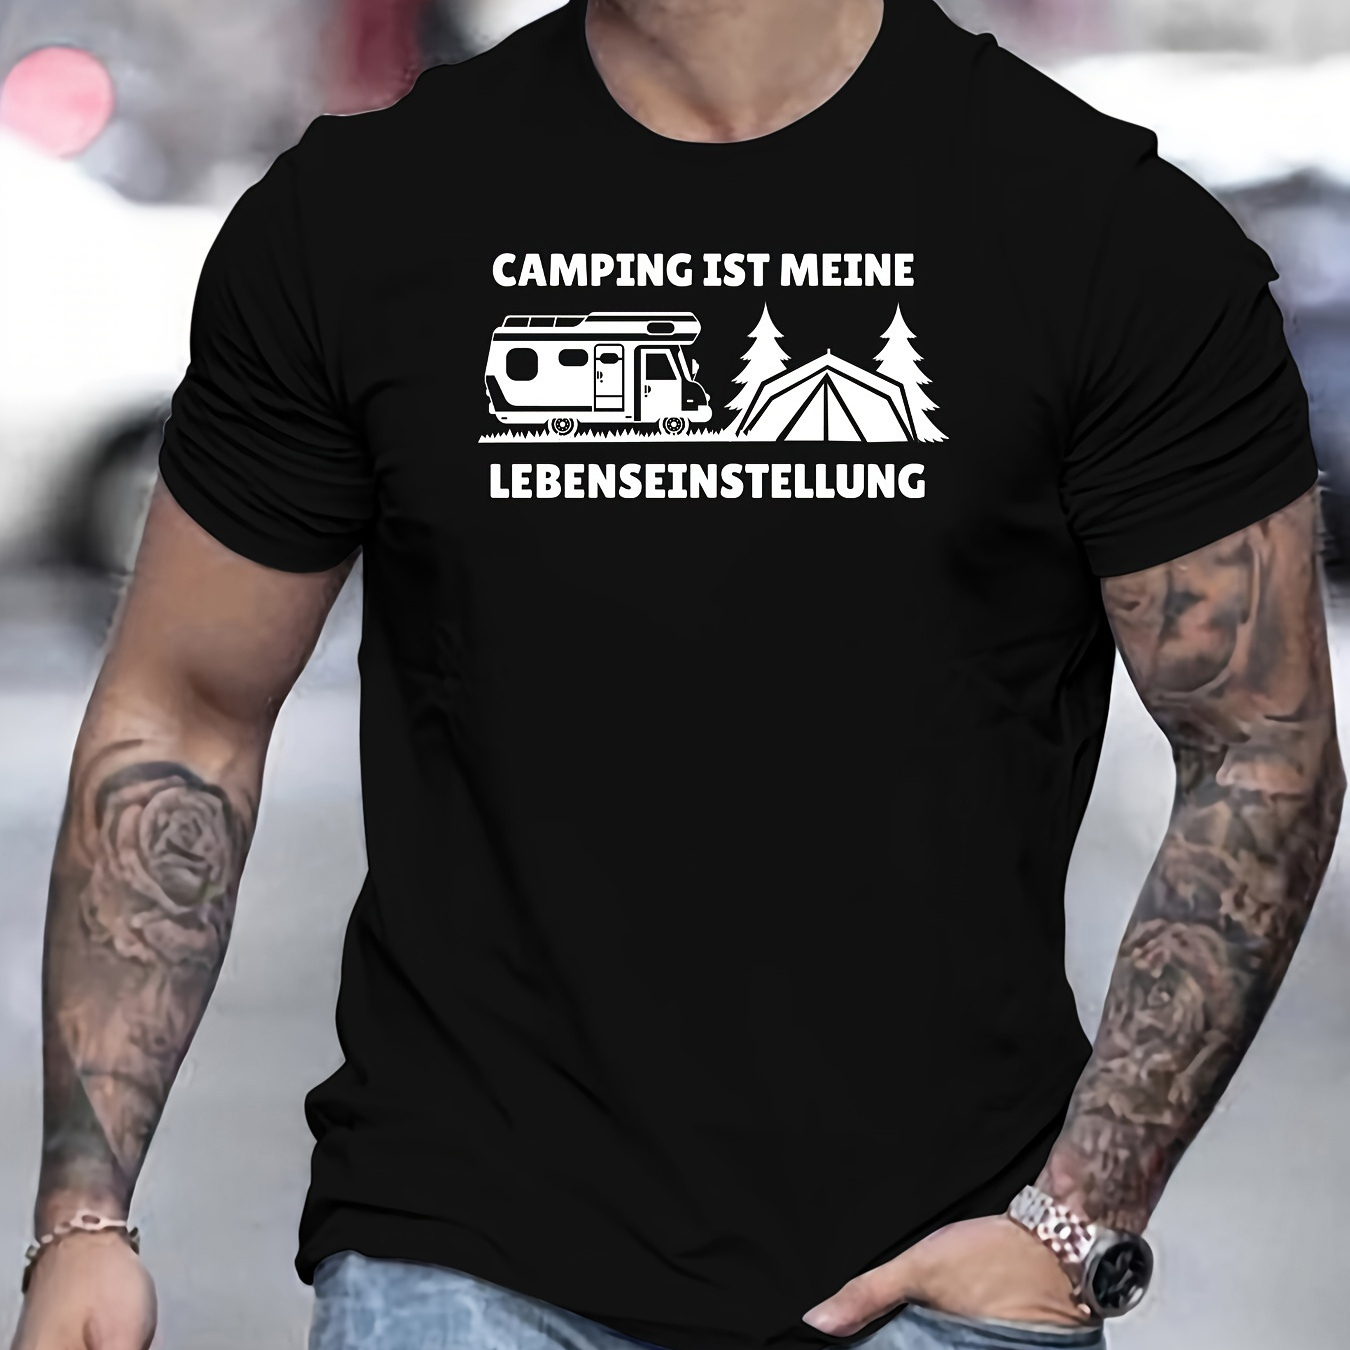 

Men's Casual Novelty T-shirt, " Camping Ist Mein" Creative Print Short Sleeve Summer Top, Comfort Fit, Stylish Crew Neck Tee For Daily Wear